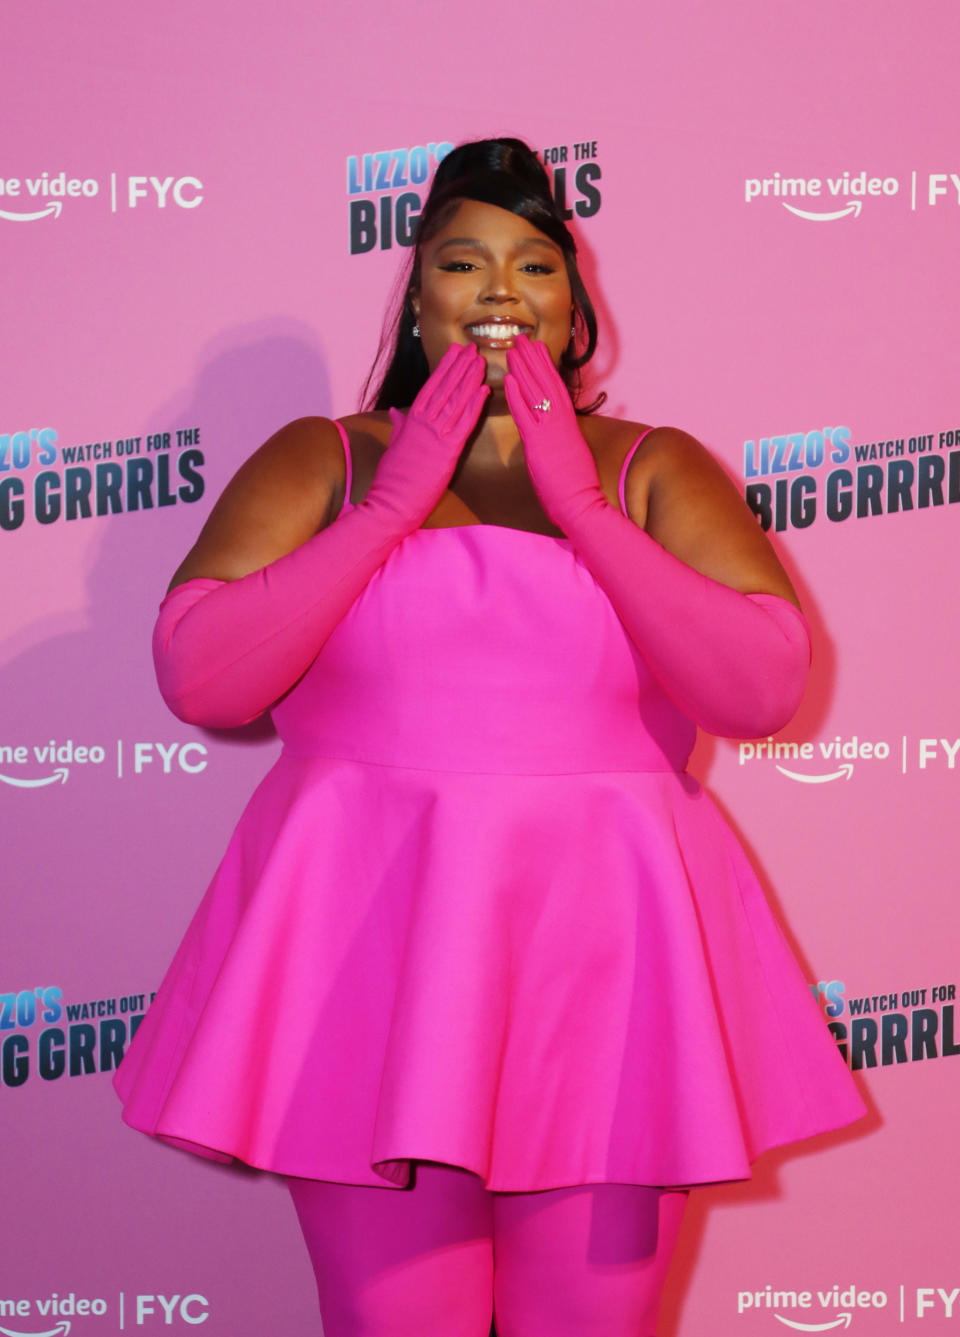 Lizzo attends Prime Videos Lizzos Watch Out For The Big Grrrls official FYC screening